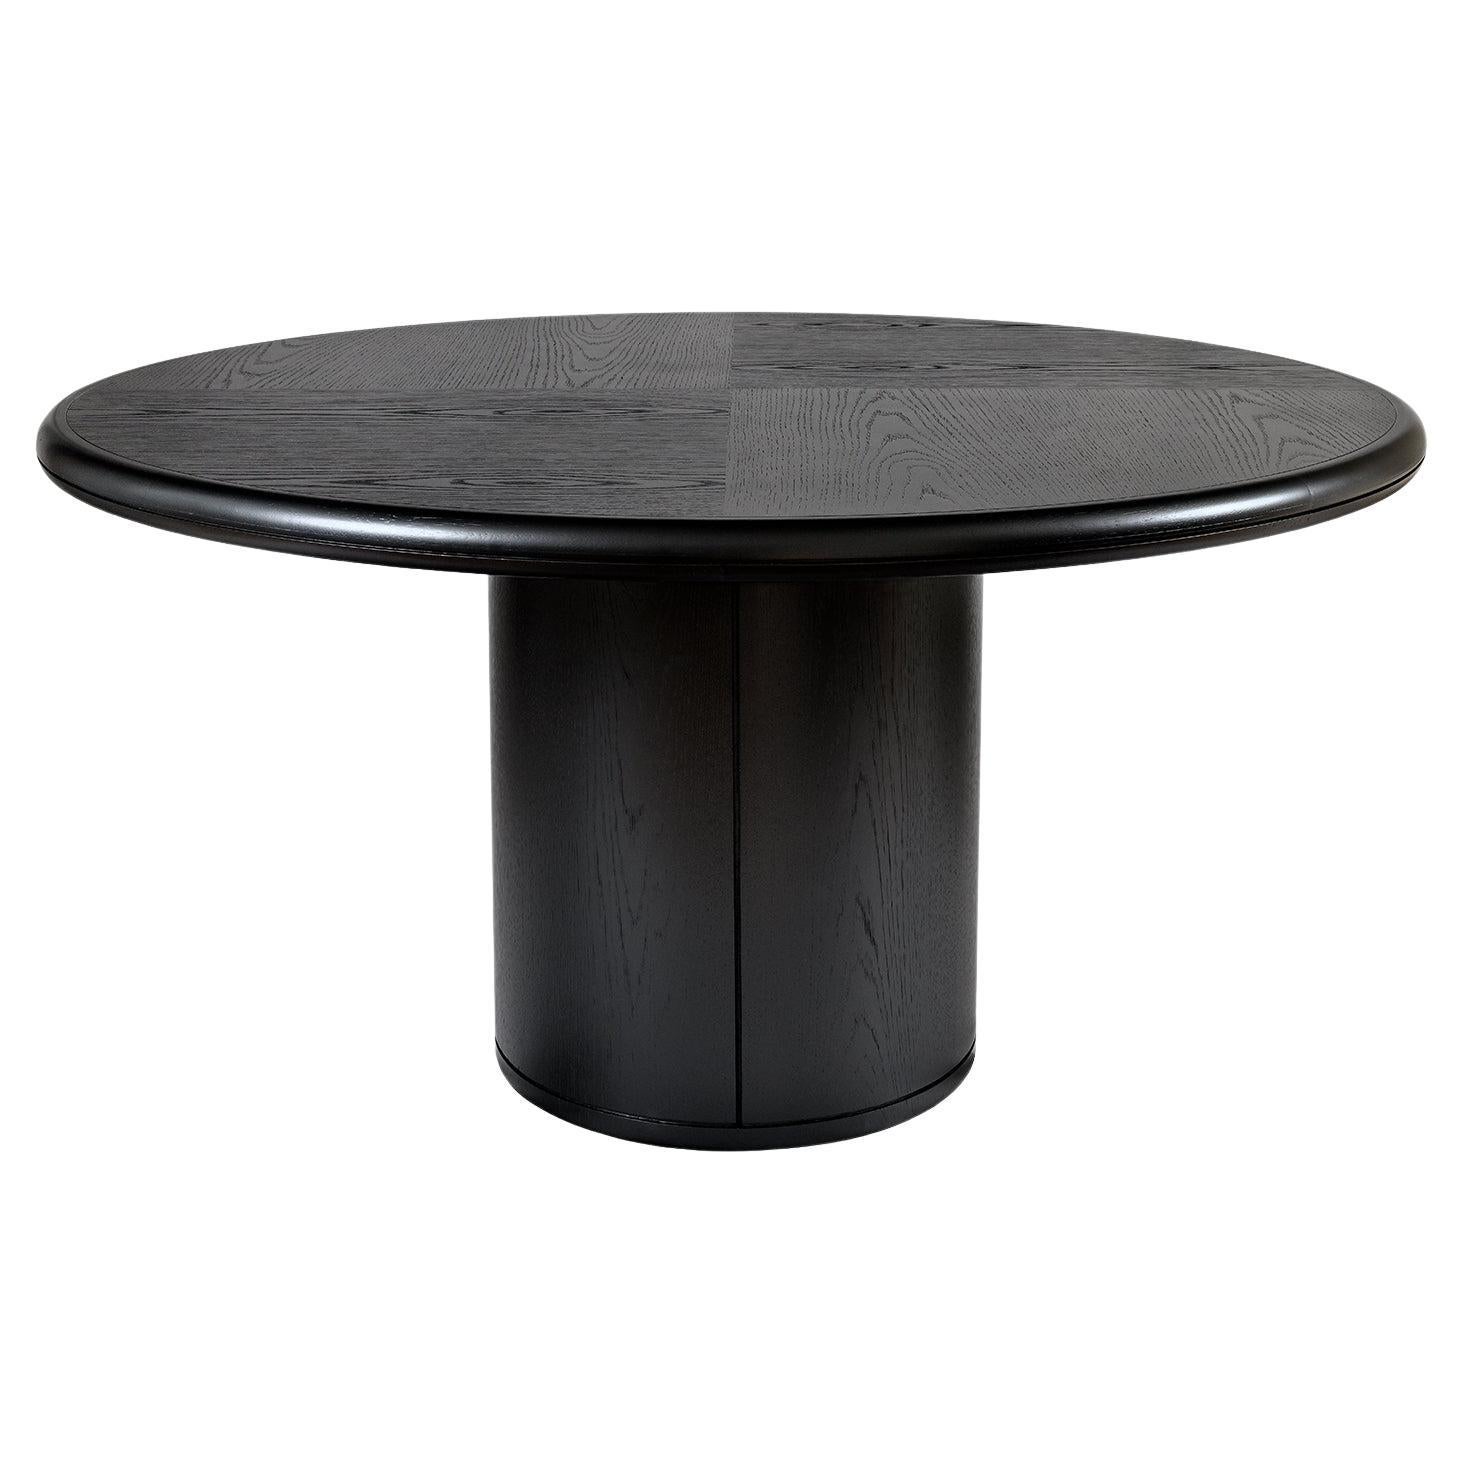 Modern, 21st Century, Oak, Wood, Round, Black, Moon Dining Table For Sale